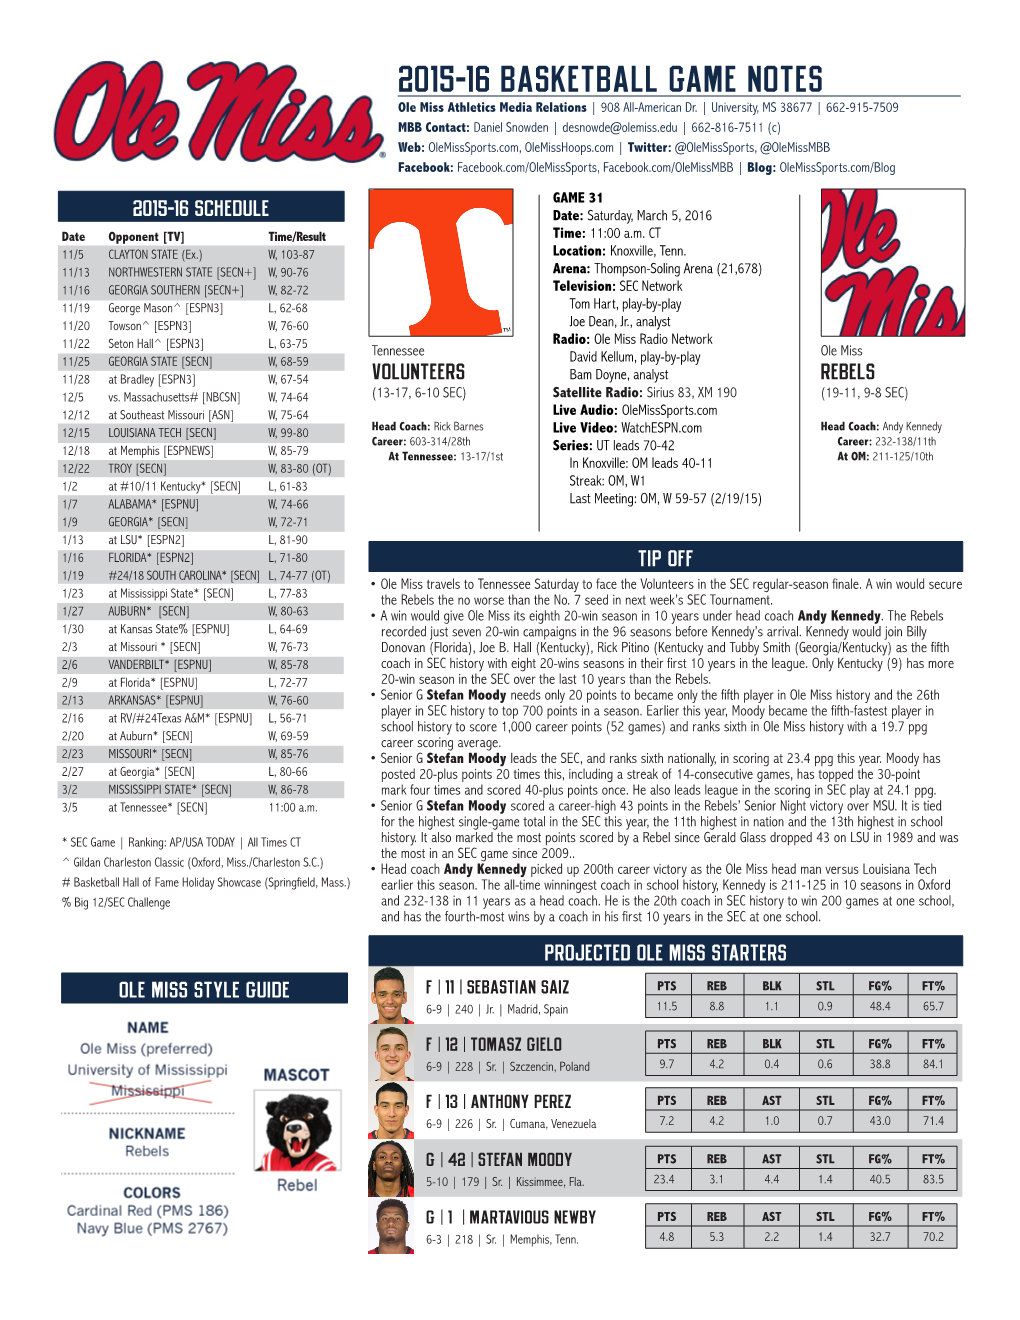 2015-16 BASKETBALL GAME NOTES Ole Miss Athletics Media Relations | 908 All-American Dr